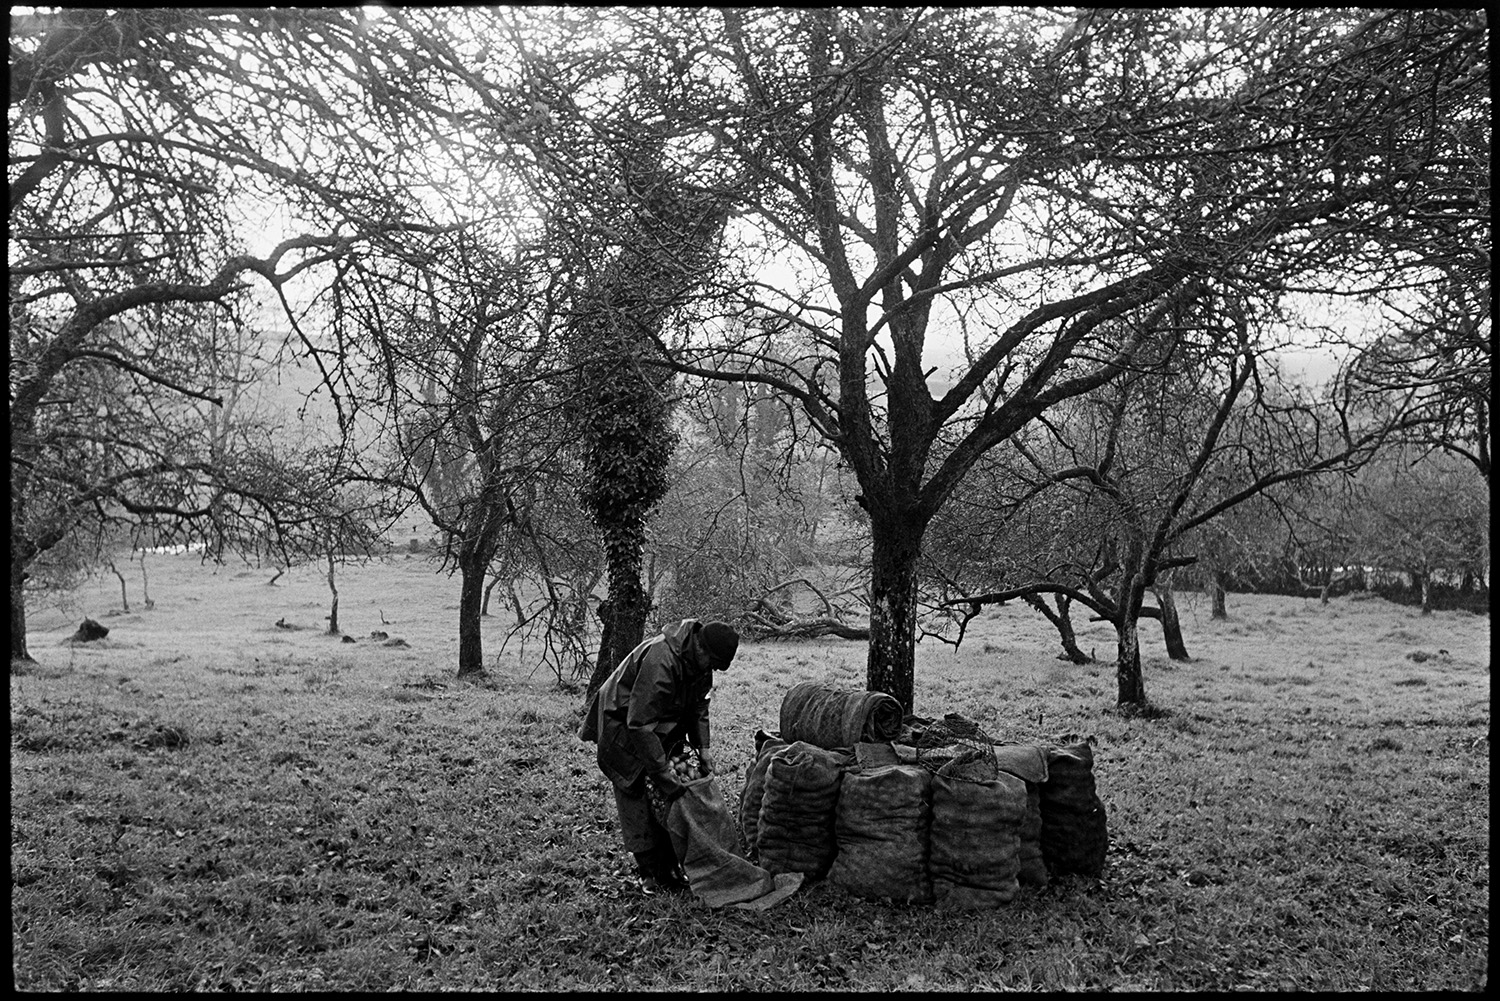 Cider orchard, man shaking apples from trees and bagging them up.
[A man bagging up apples in a cider orchard at Westpark, Iddesleigh. Full sacks are stacked around a tree, with the orchard shown in the background.]